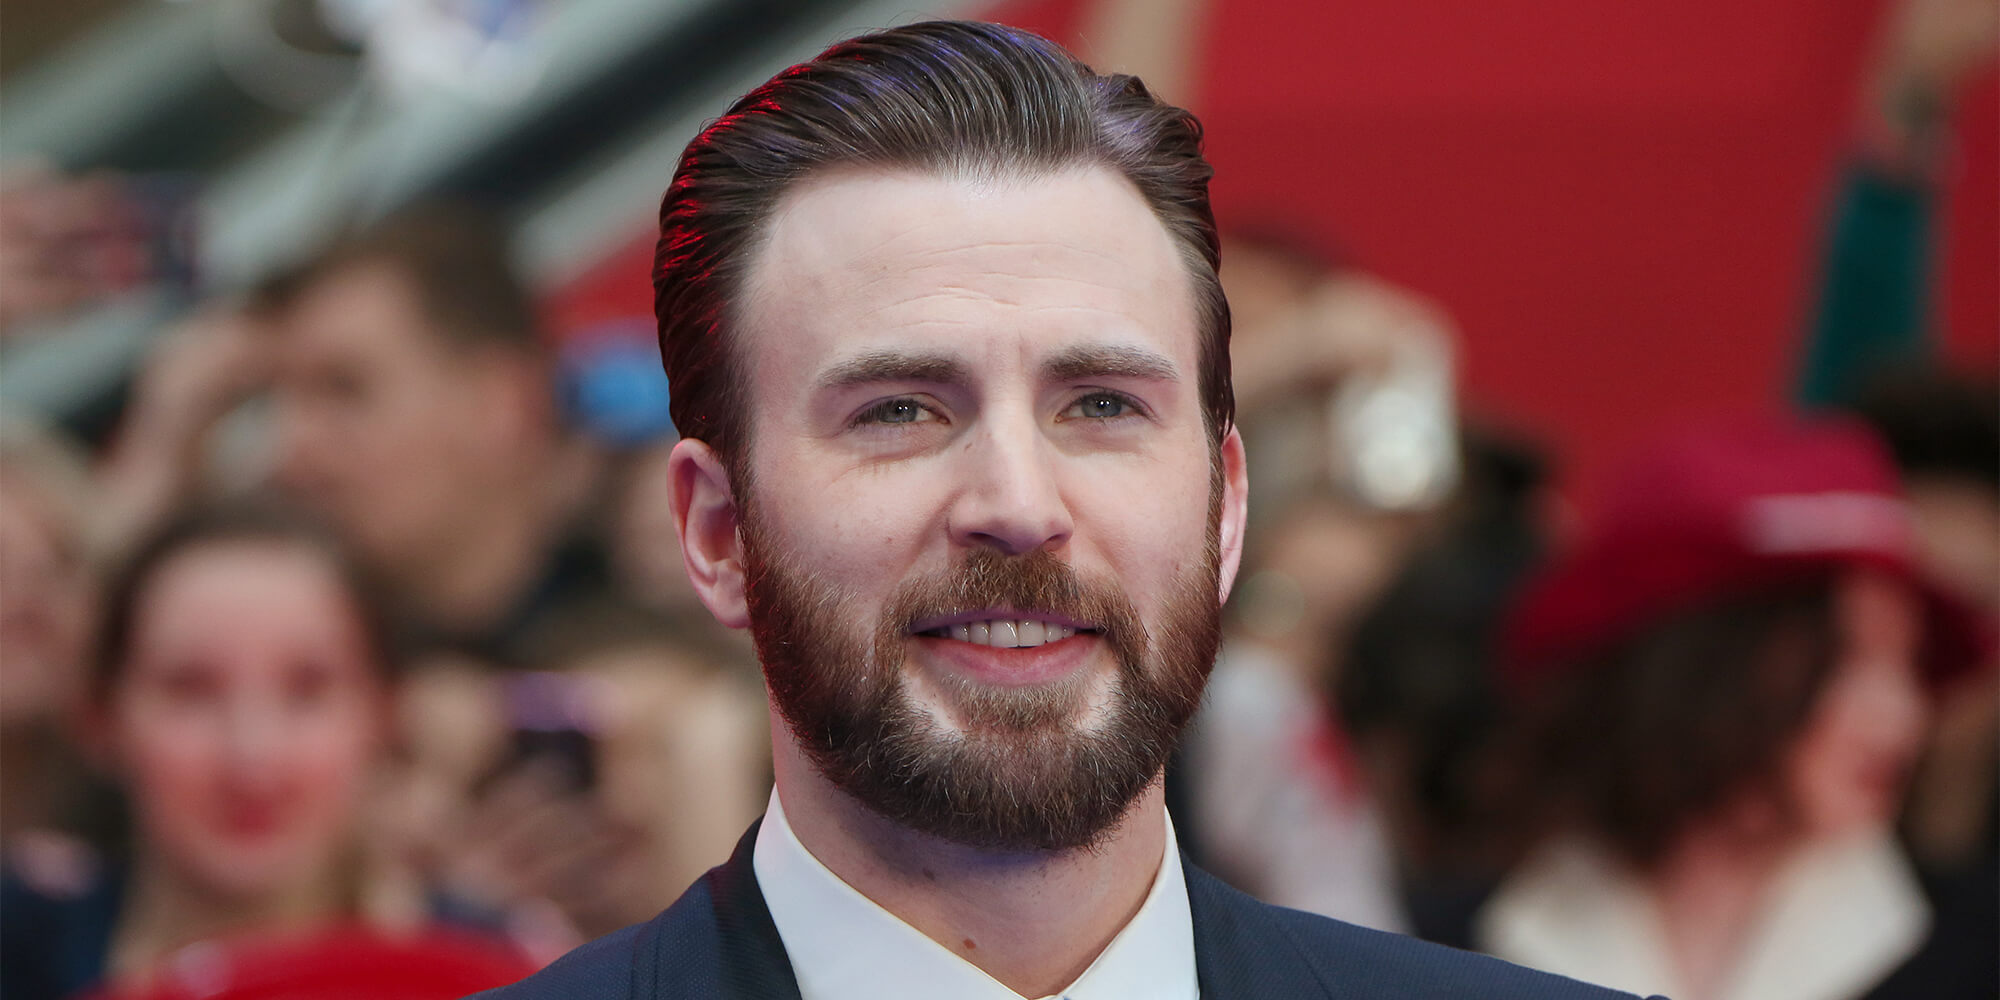 20 Best Chris Evans Hairstyles with Images  AtoZ Hairstyles